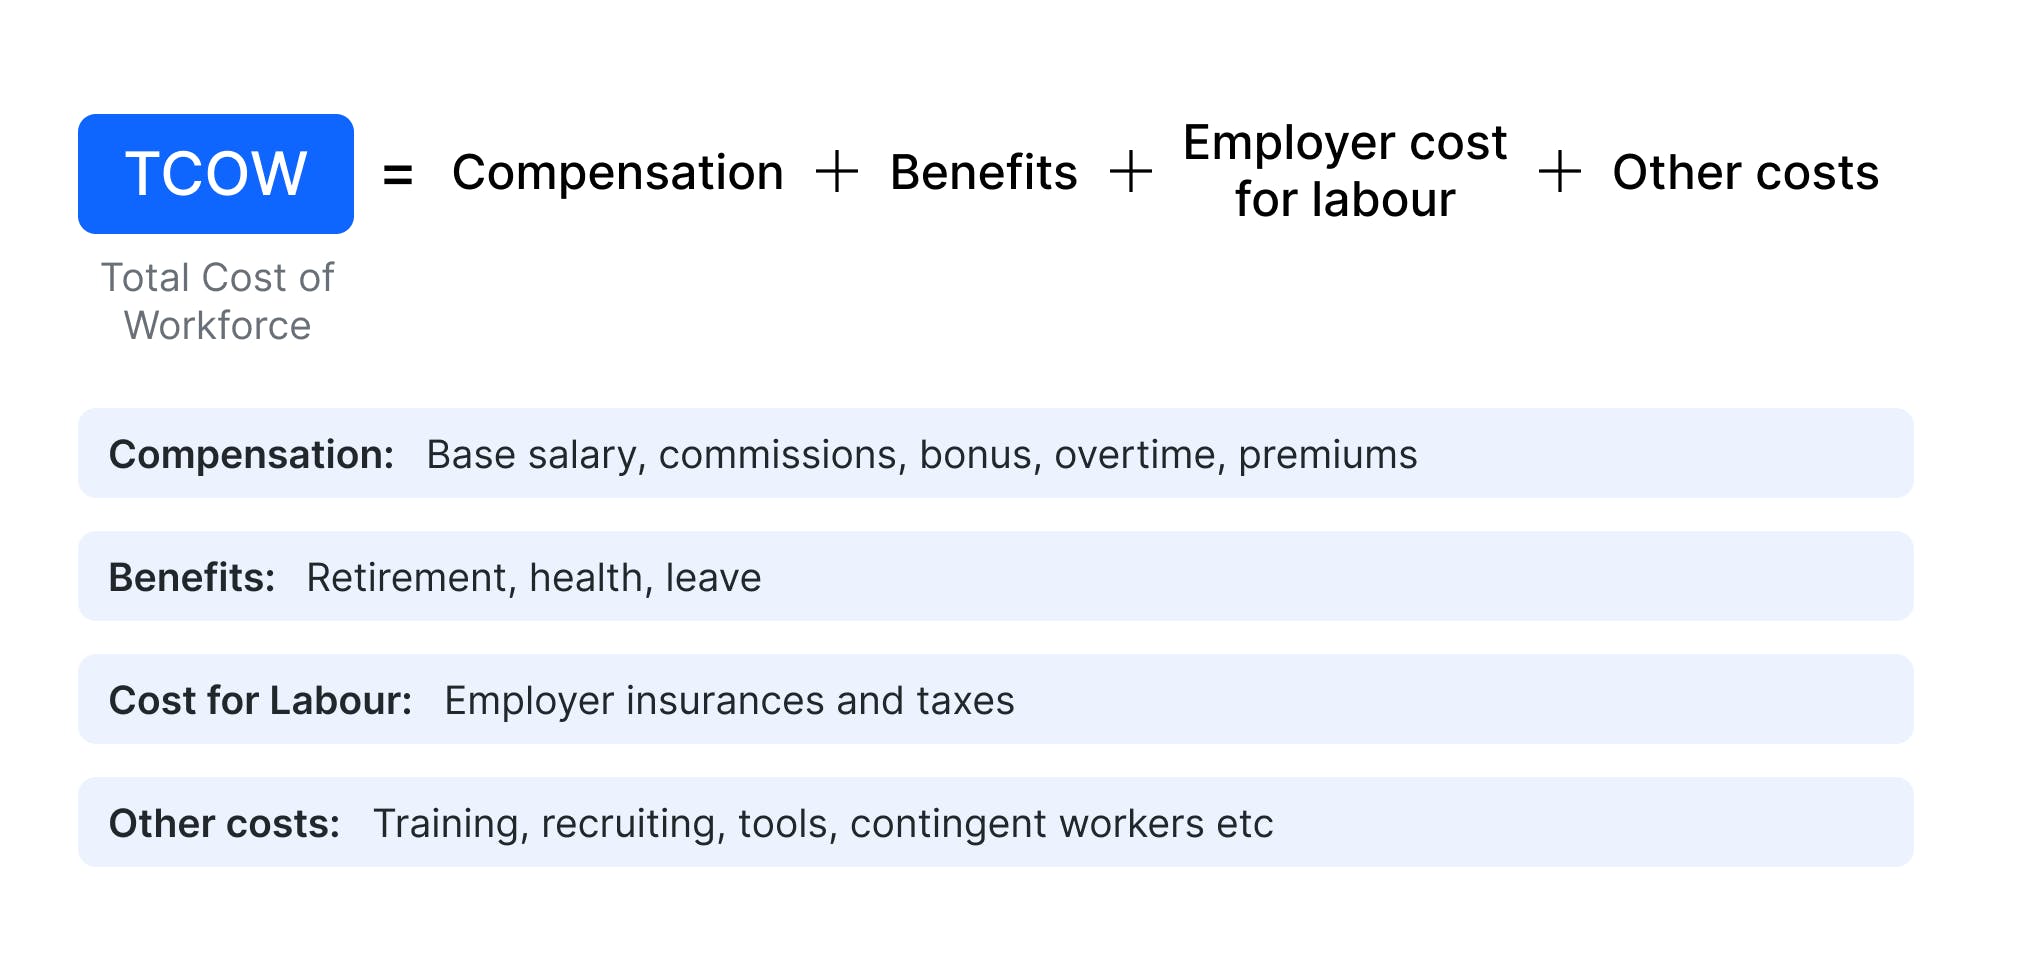 Total cost of workforce = compensation + benefits + employer cost for labour + other costs